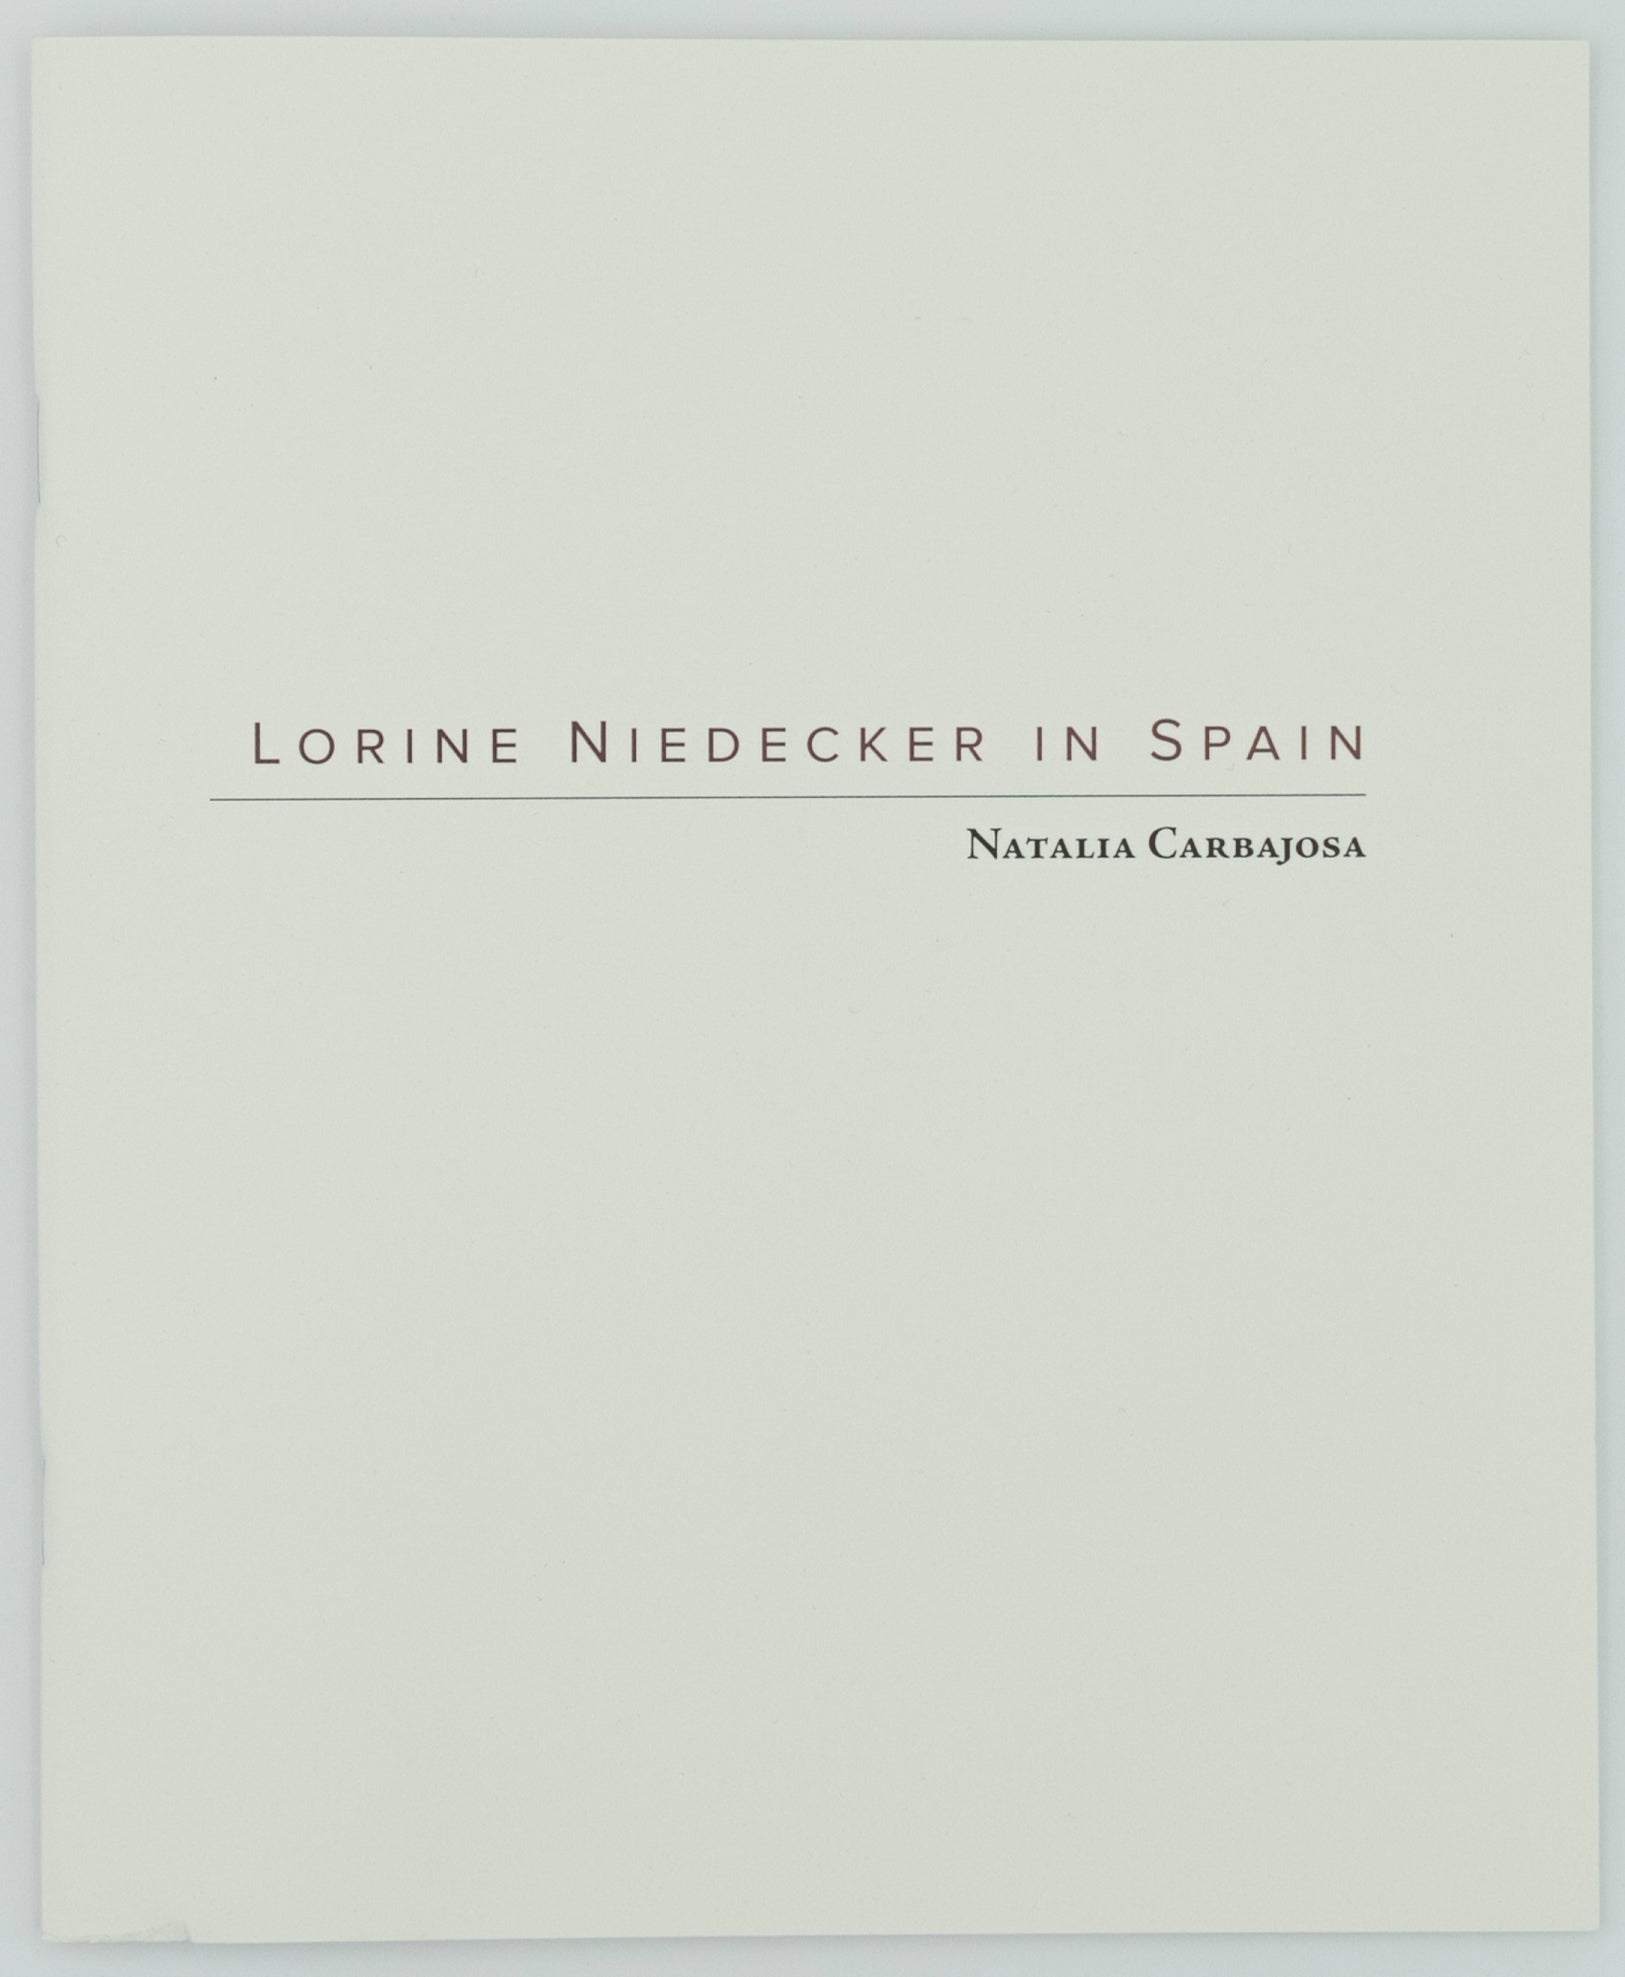 Cover of the zine titled Lorine Niedecker in Spain by Natalia Carbajosa. The text is in black on a mint green background.